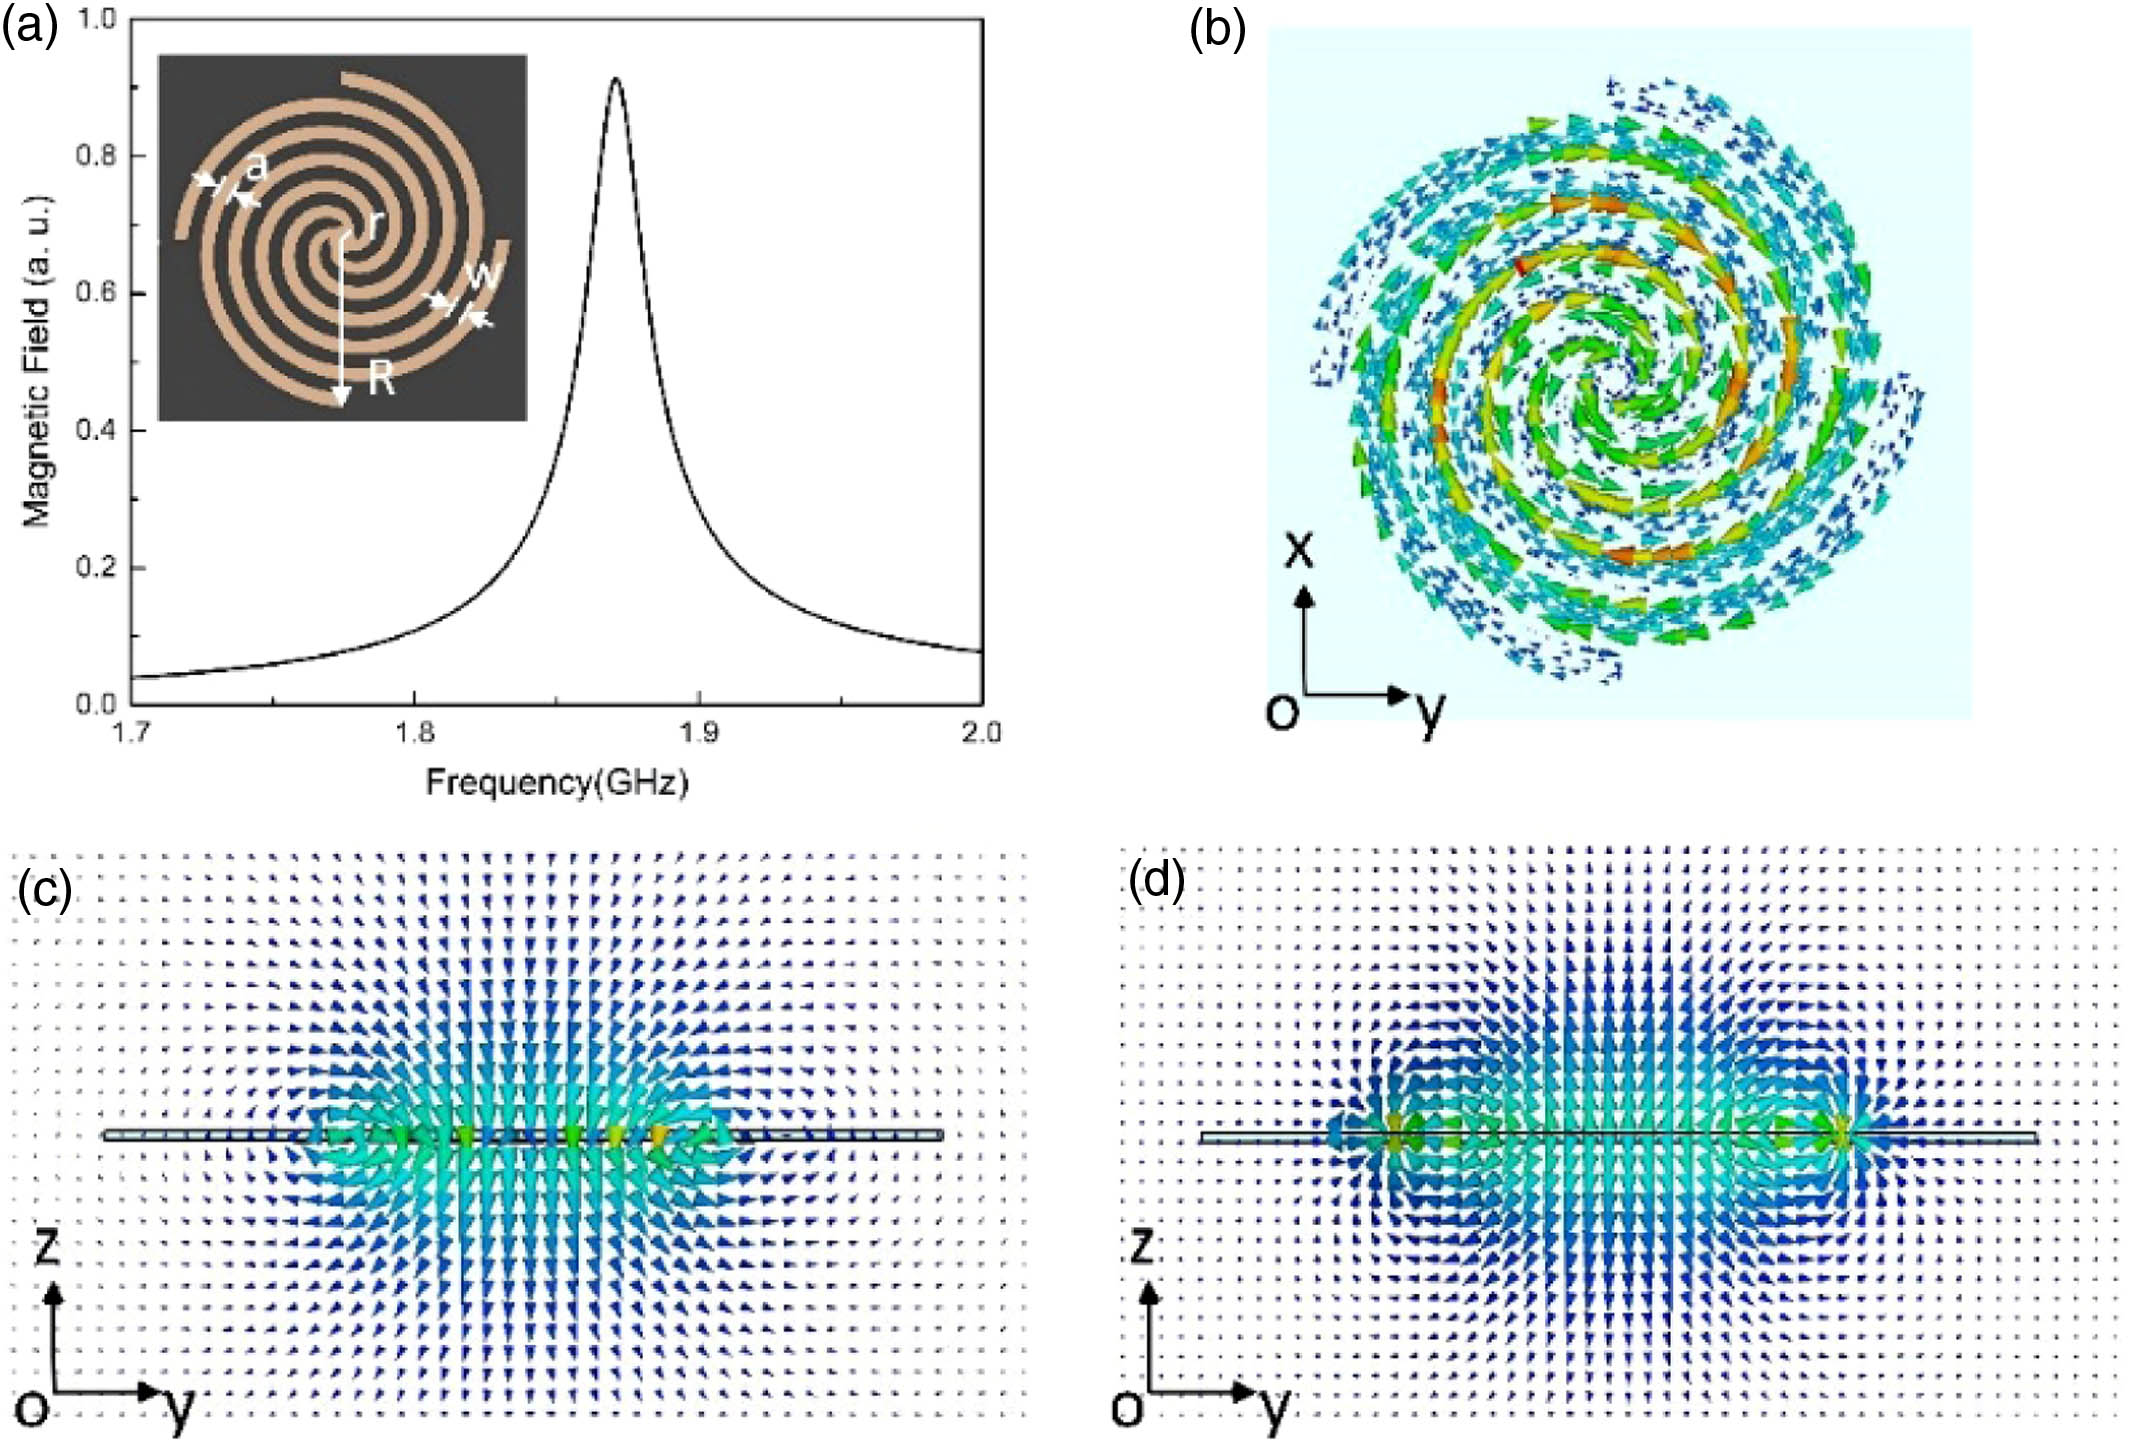 (a) Magnetic field amplitude intensity detected at the center of the resonators; the inset is a schematic illustration of the metallic spiral structure. (b) Current distribution at z=0, (c) magnetic field at x=0, (d) electric field at x=0.